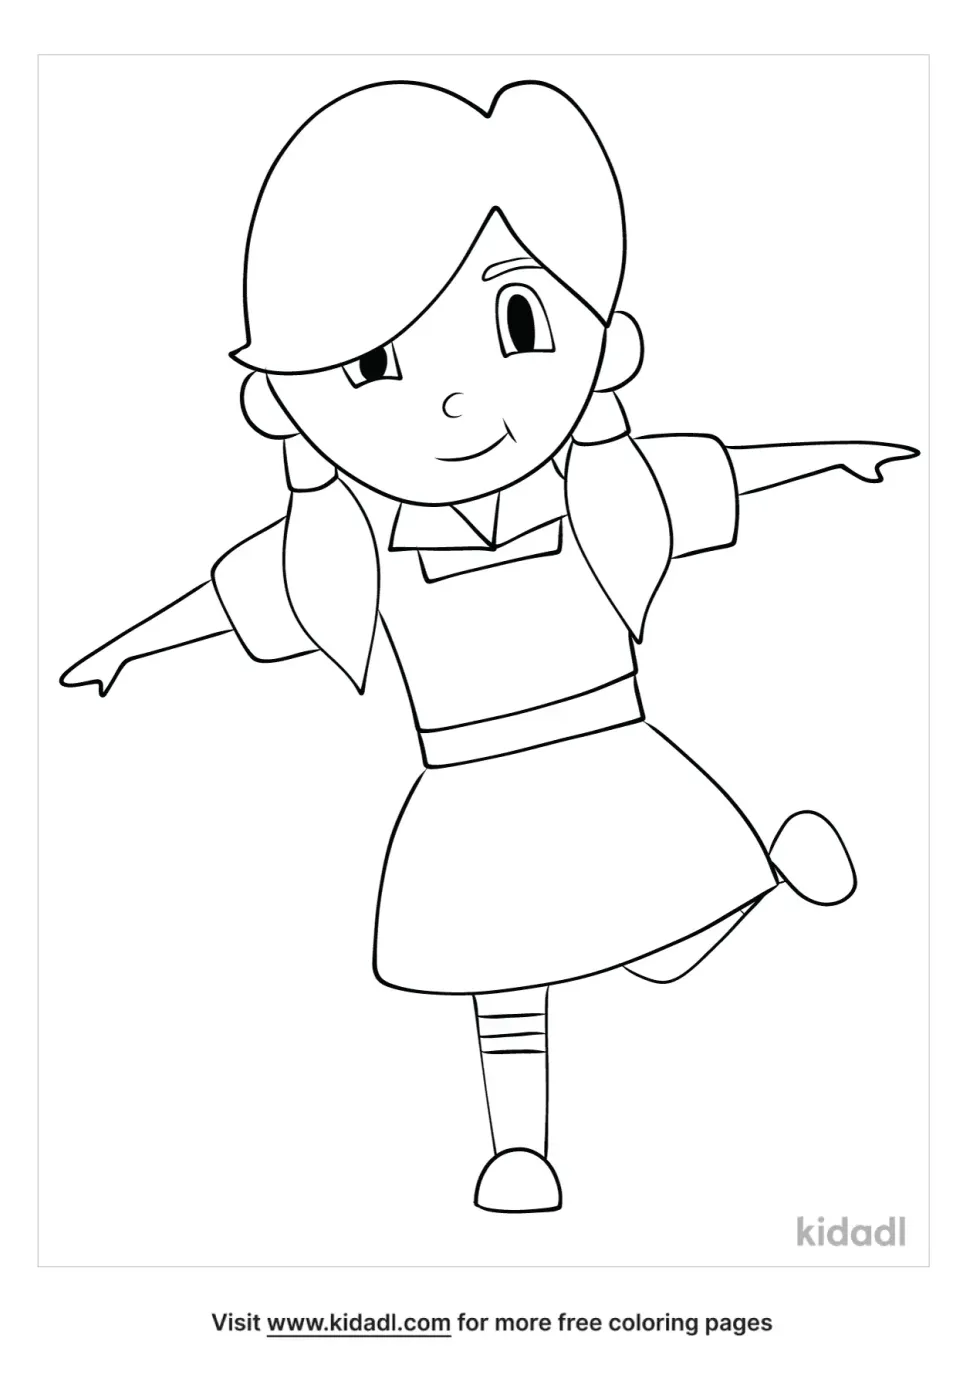 Getting Dressed For School Coloring Page